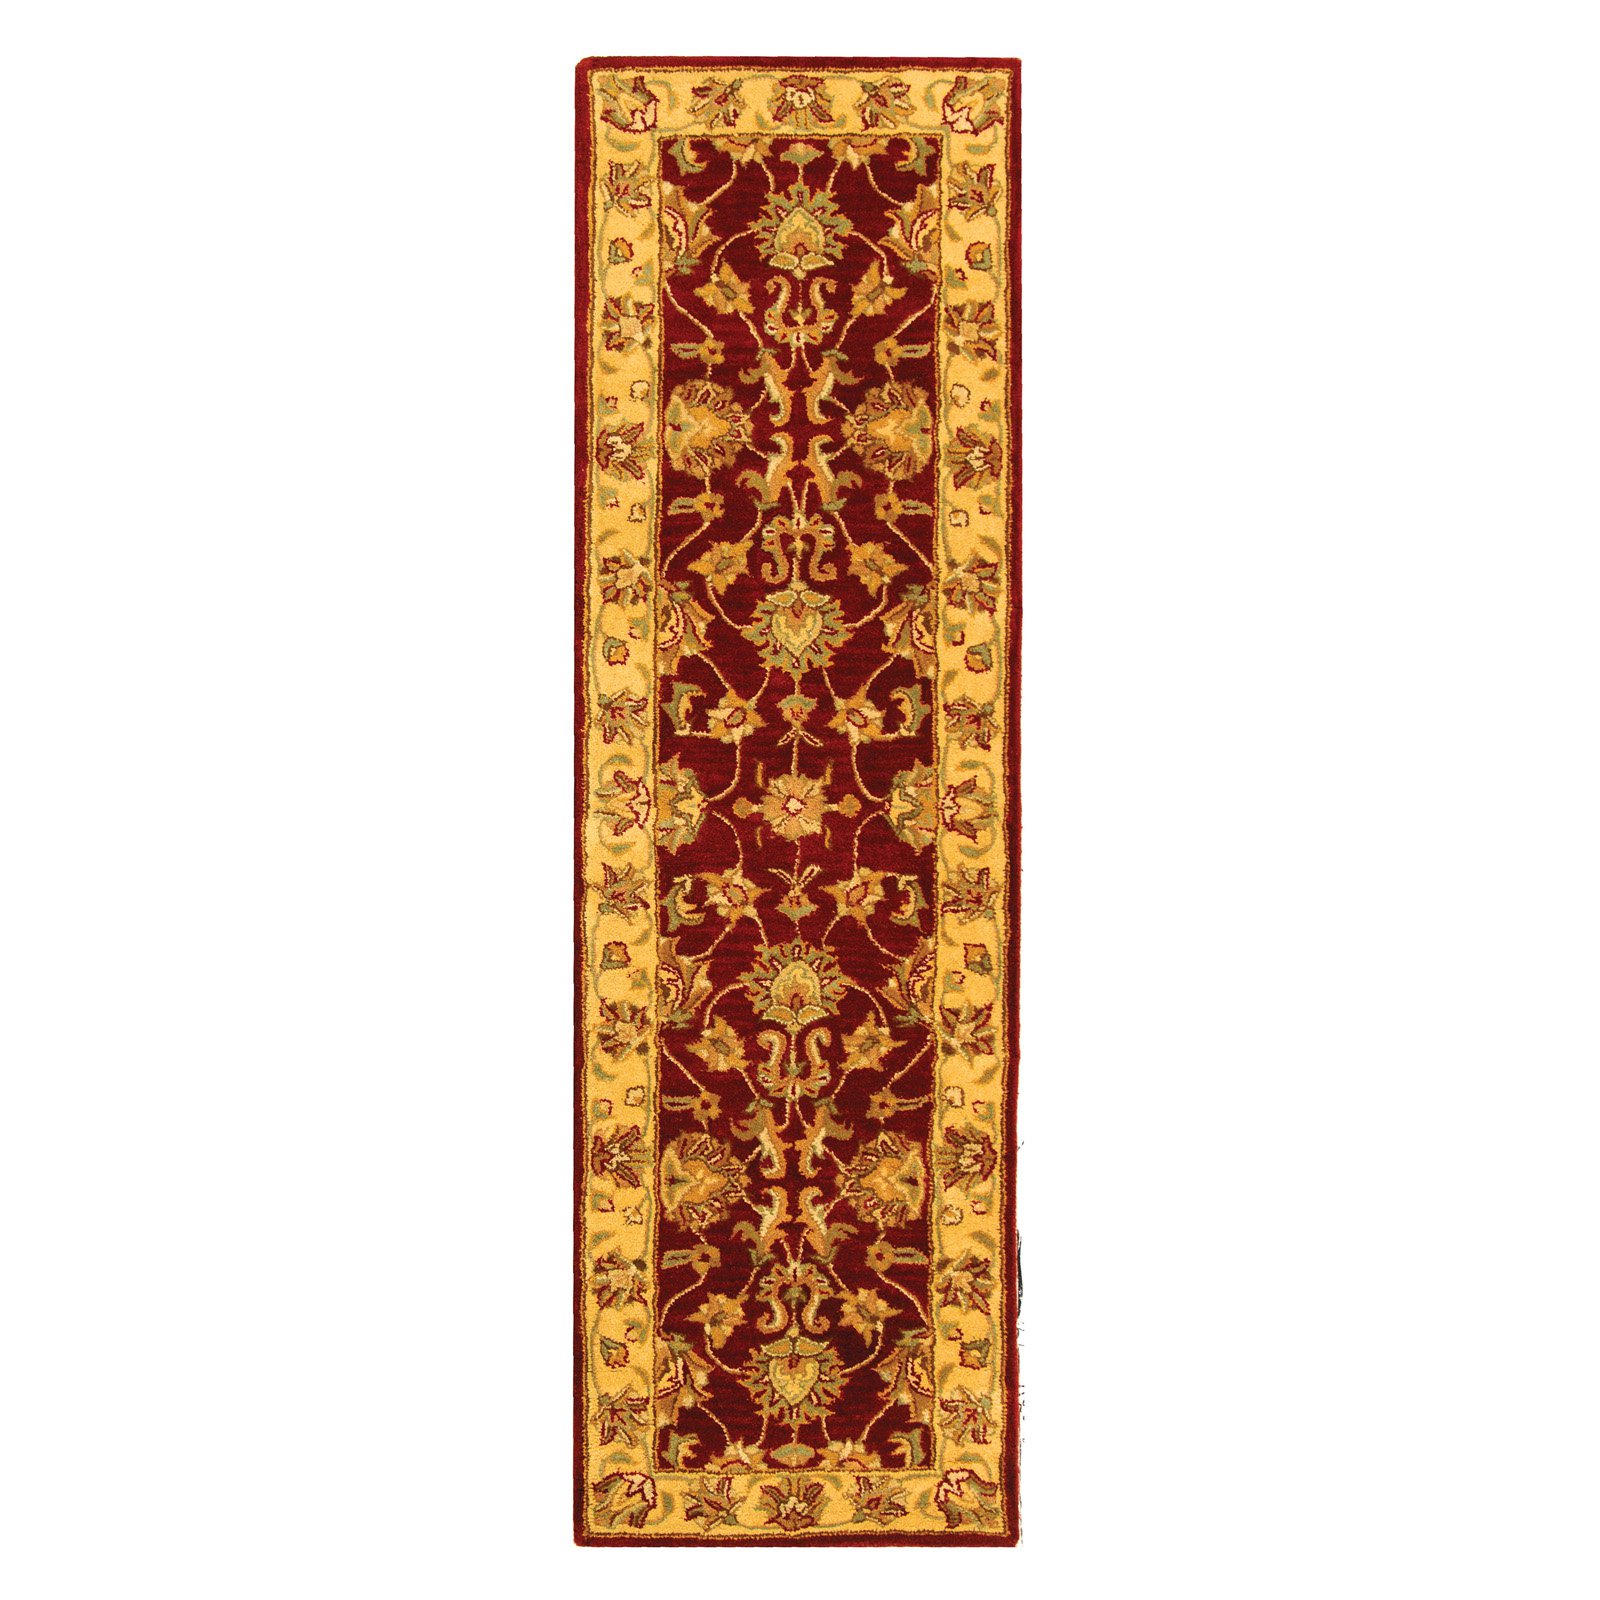 SAFAVIEH Heritage Regis Traditional Wool Area Rug, Red/Gold, 7'6" x 9'6" Oval - image 3 of 9